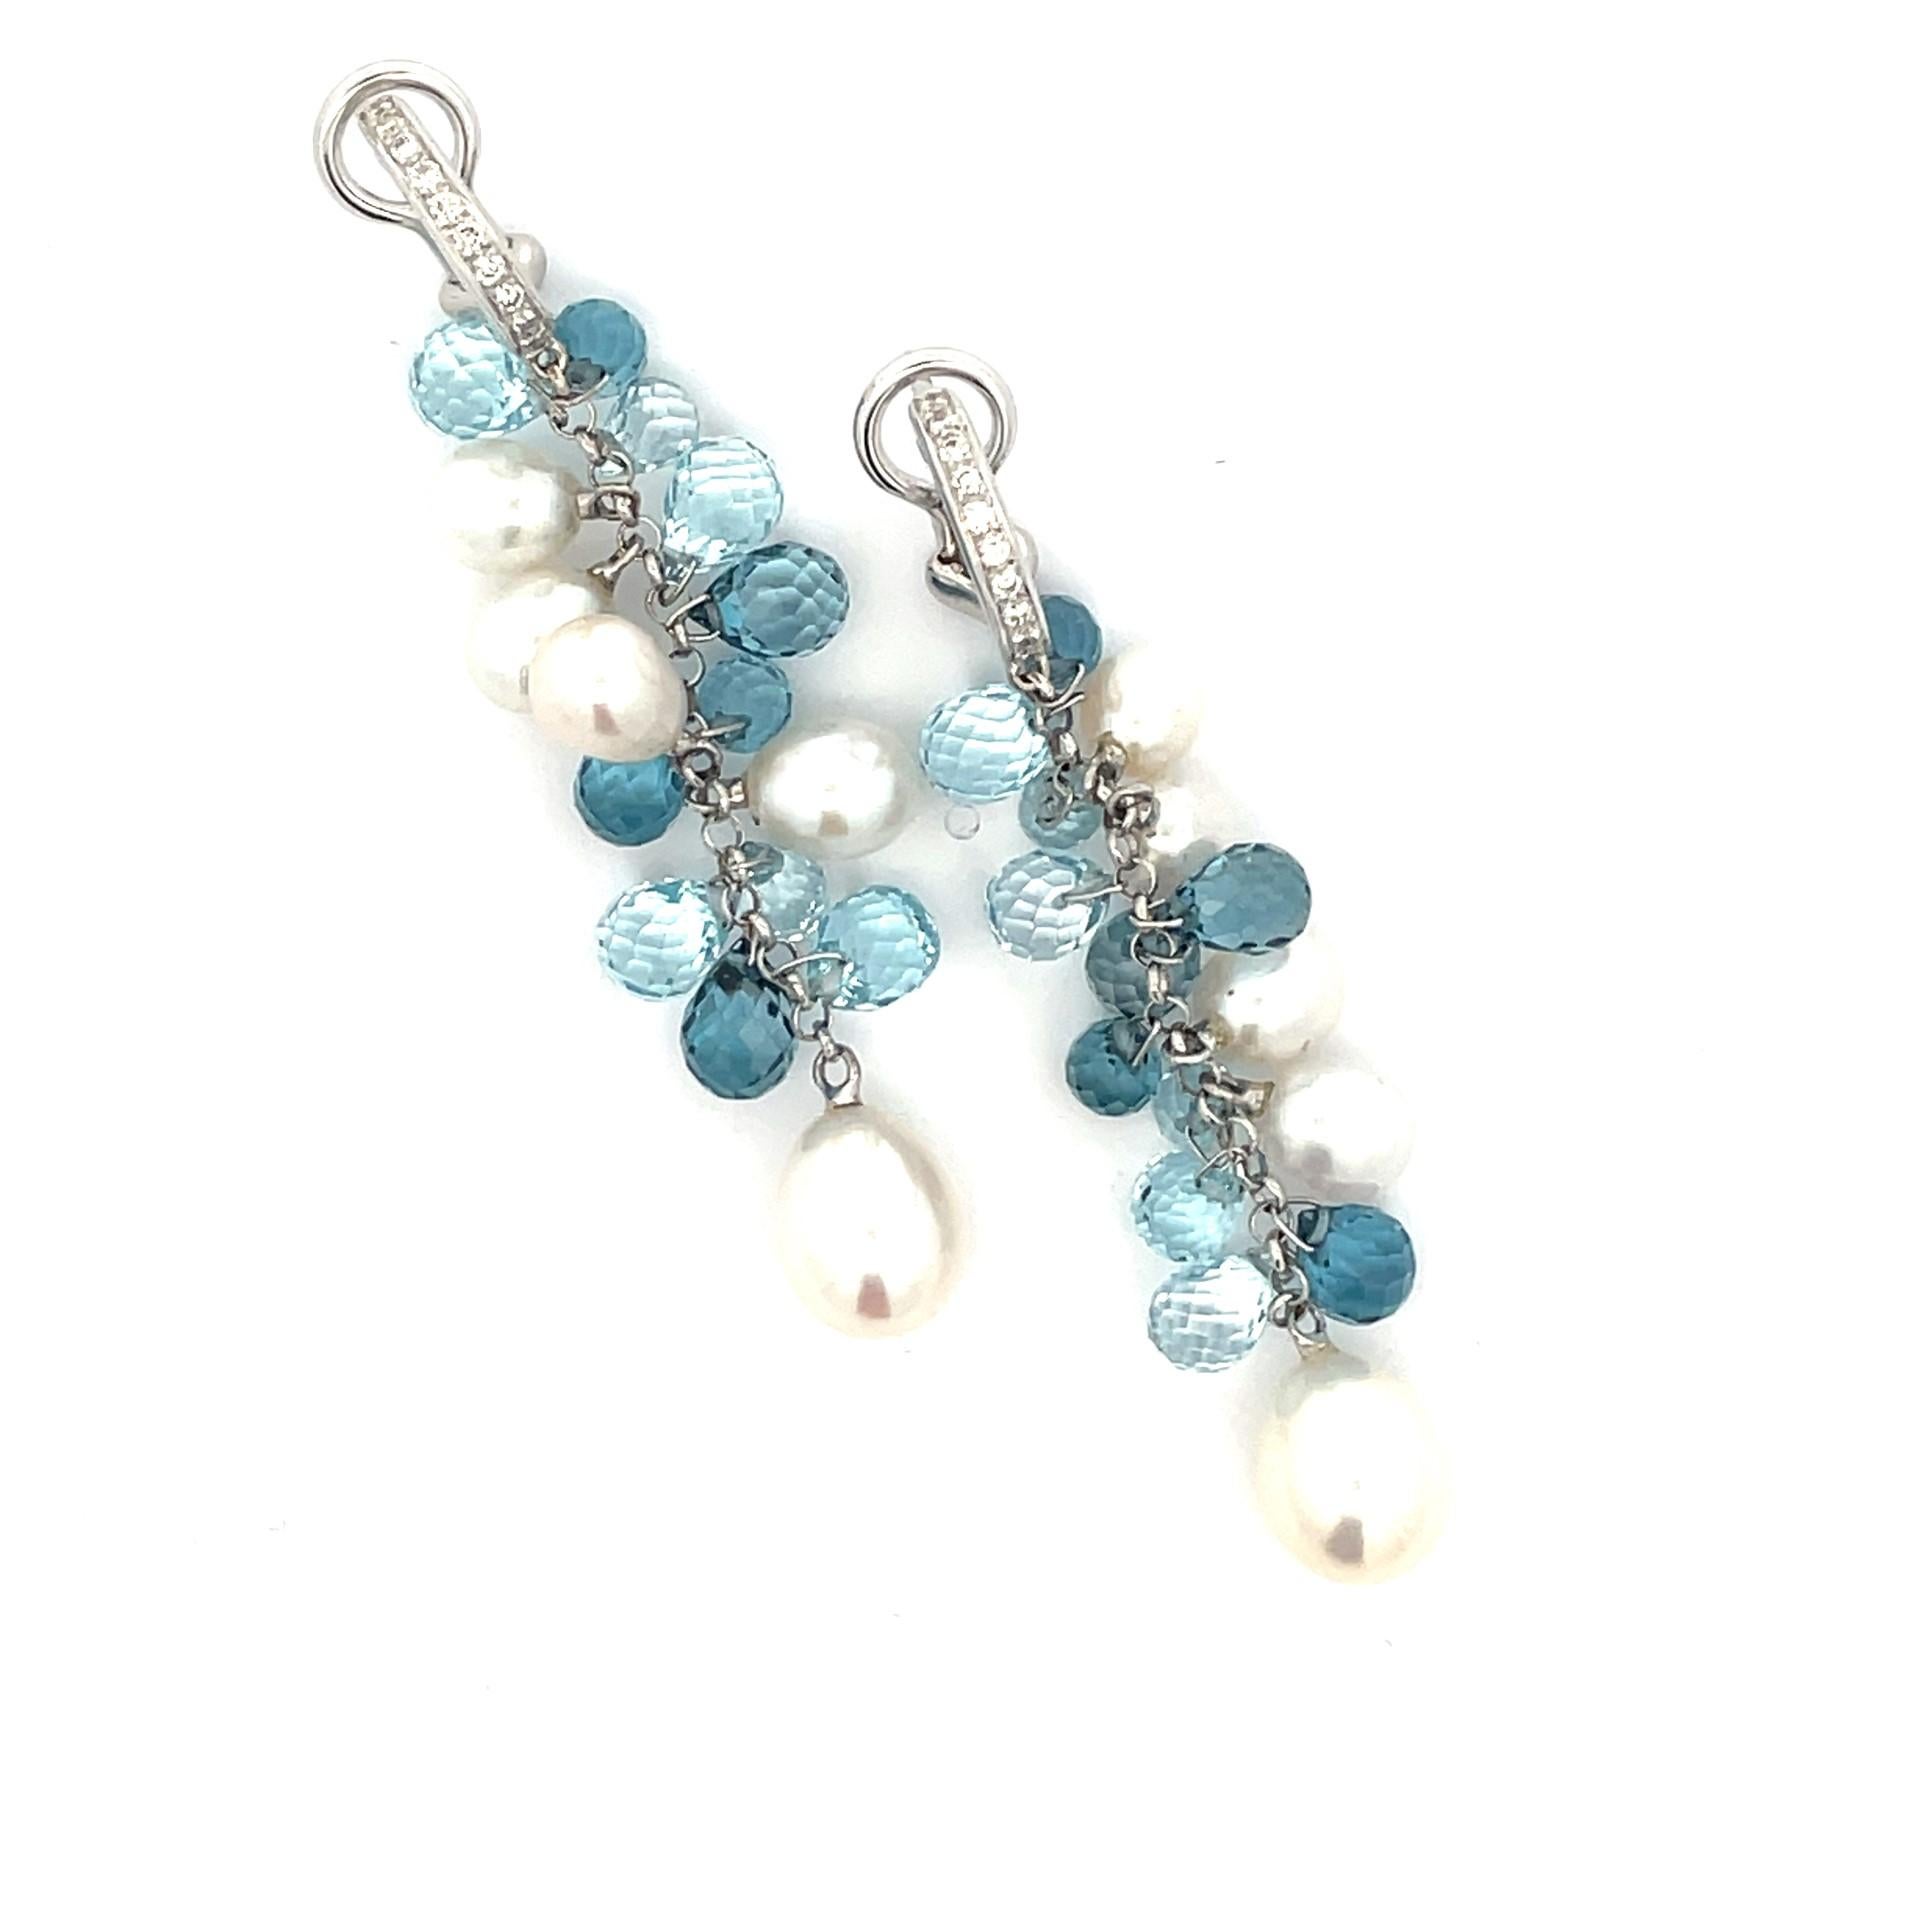 A pair of fun hanging earrings in 18kt white gold with  diamonds, pearls and 22  blue topaz briolettes of the finest quality. 

24 brilliant cut diamond  0.23ct total weight

22 blue topaz briolette 26.92ct total weight

10 Pearls, measuring 6x7mm -